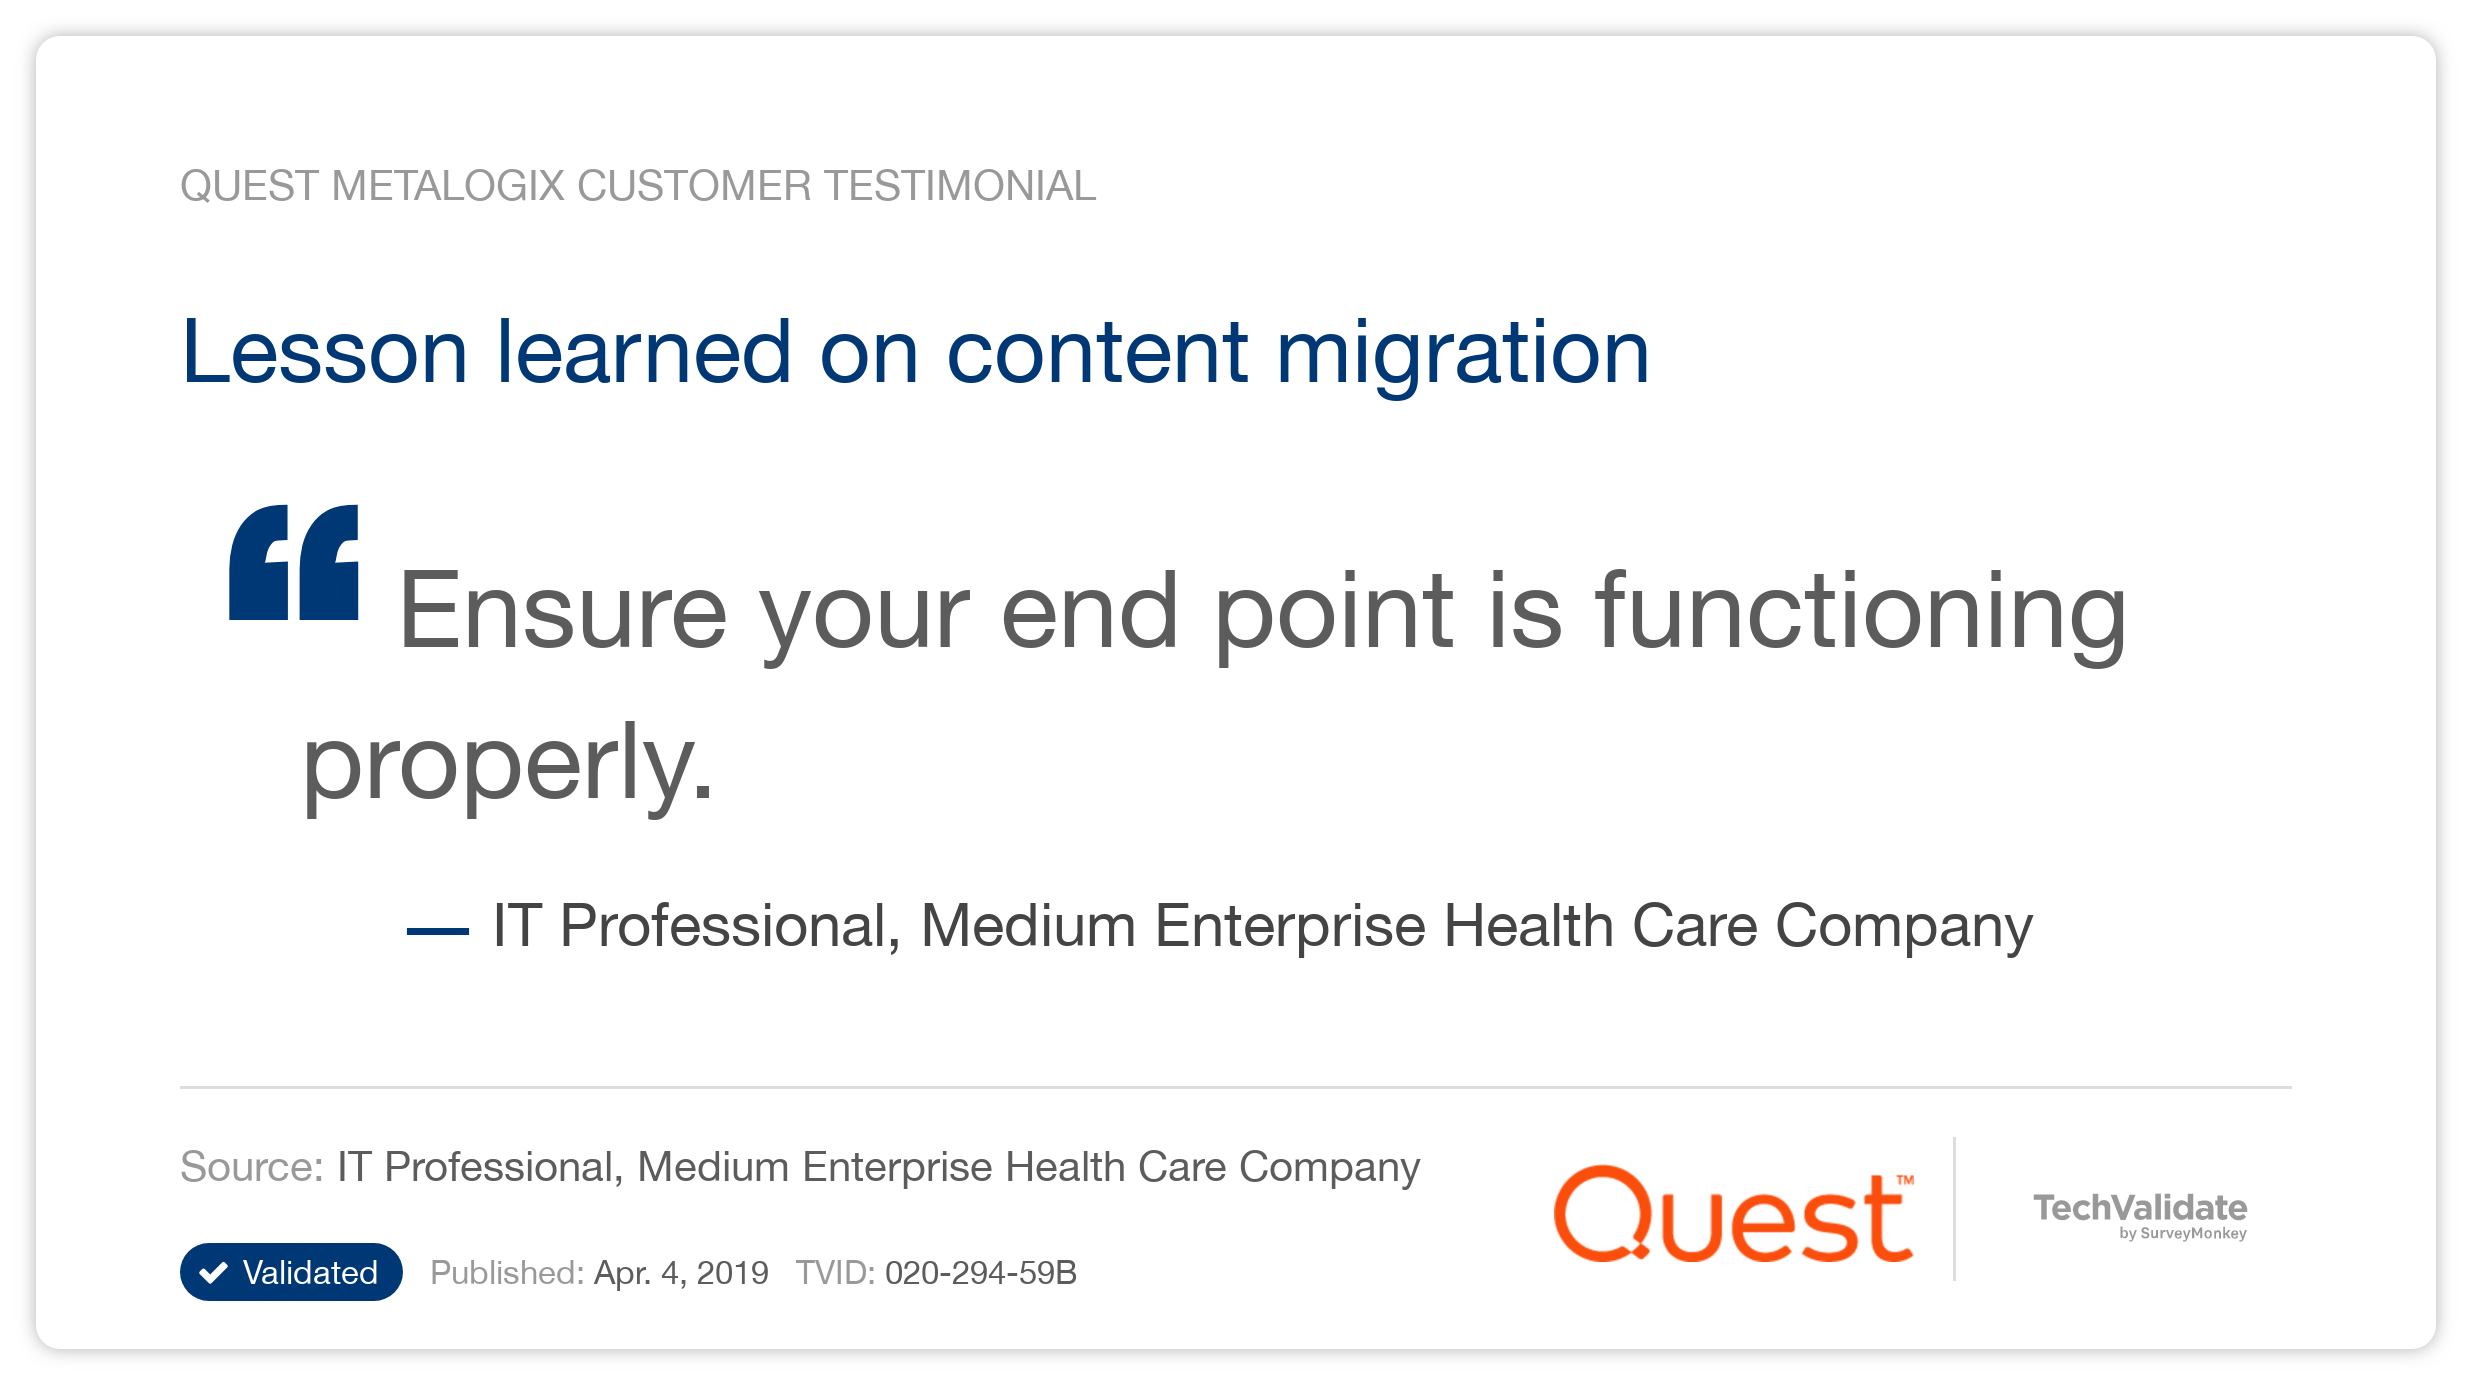 Lesson learned on content migration